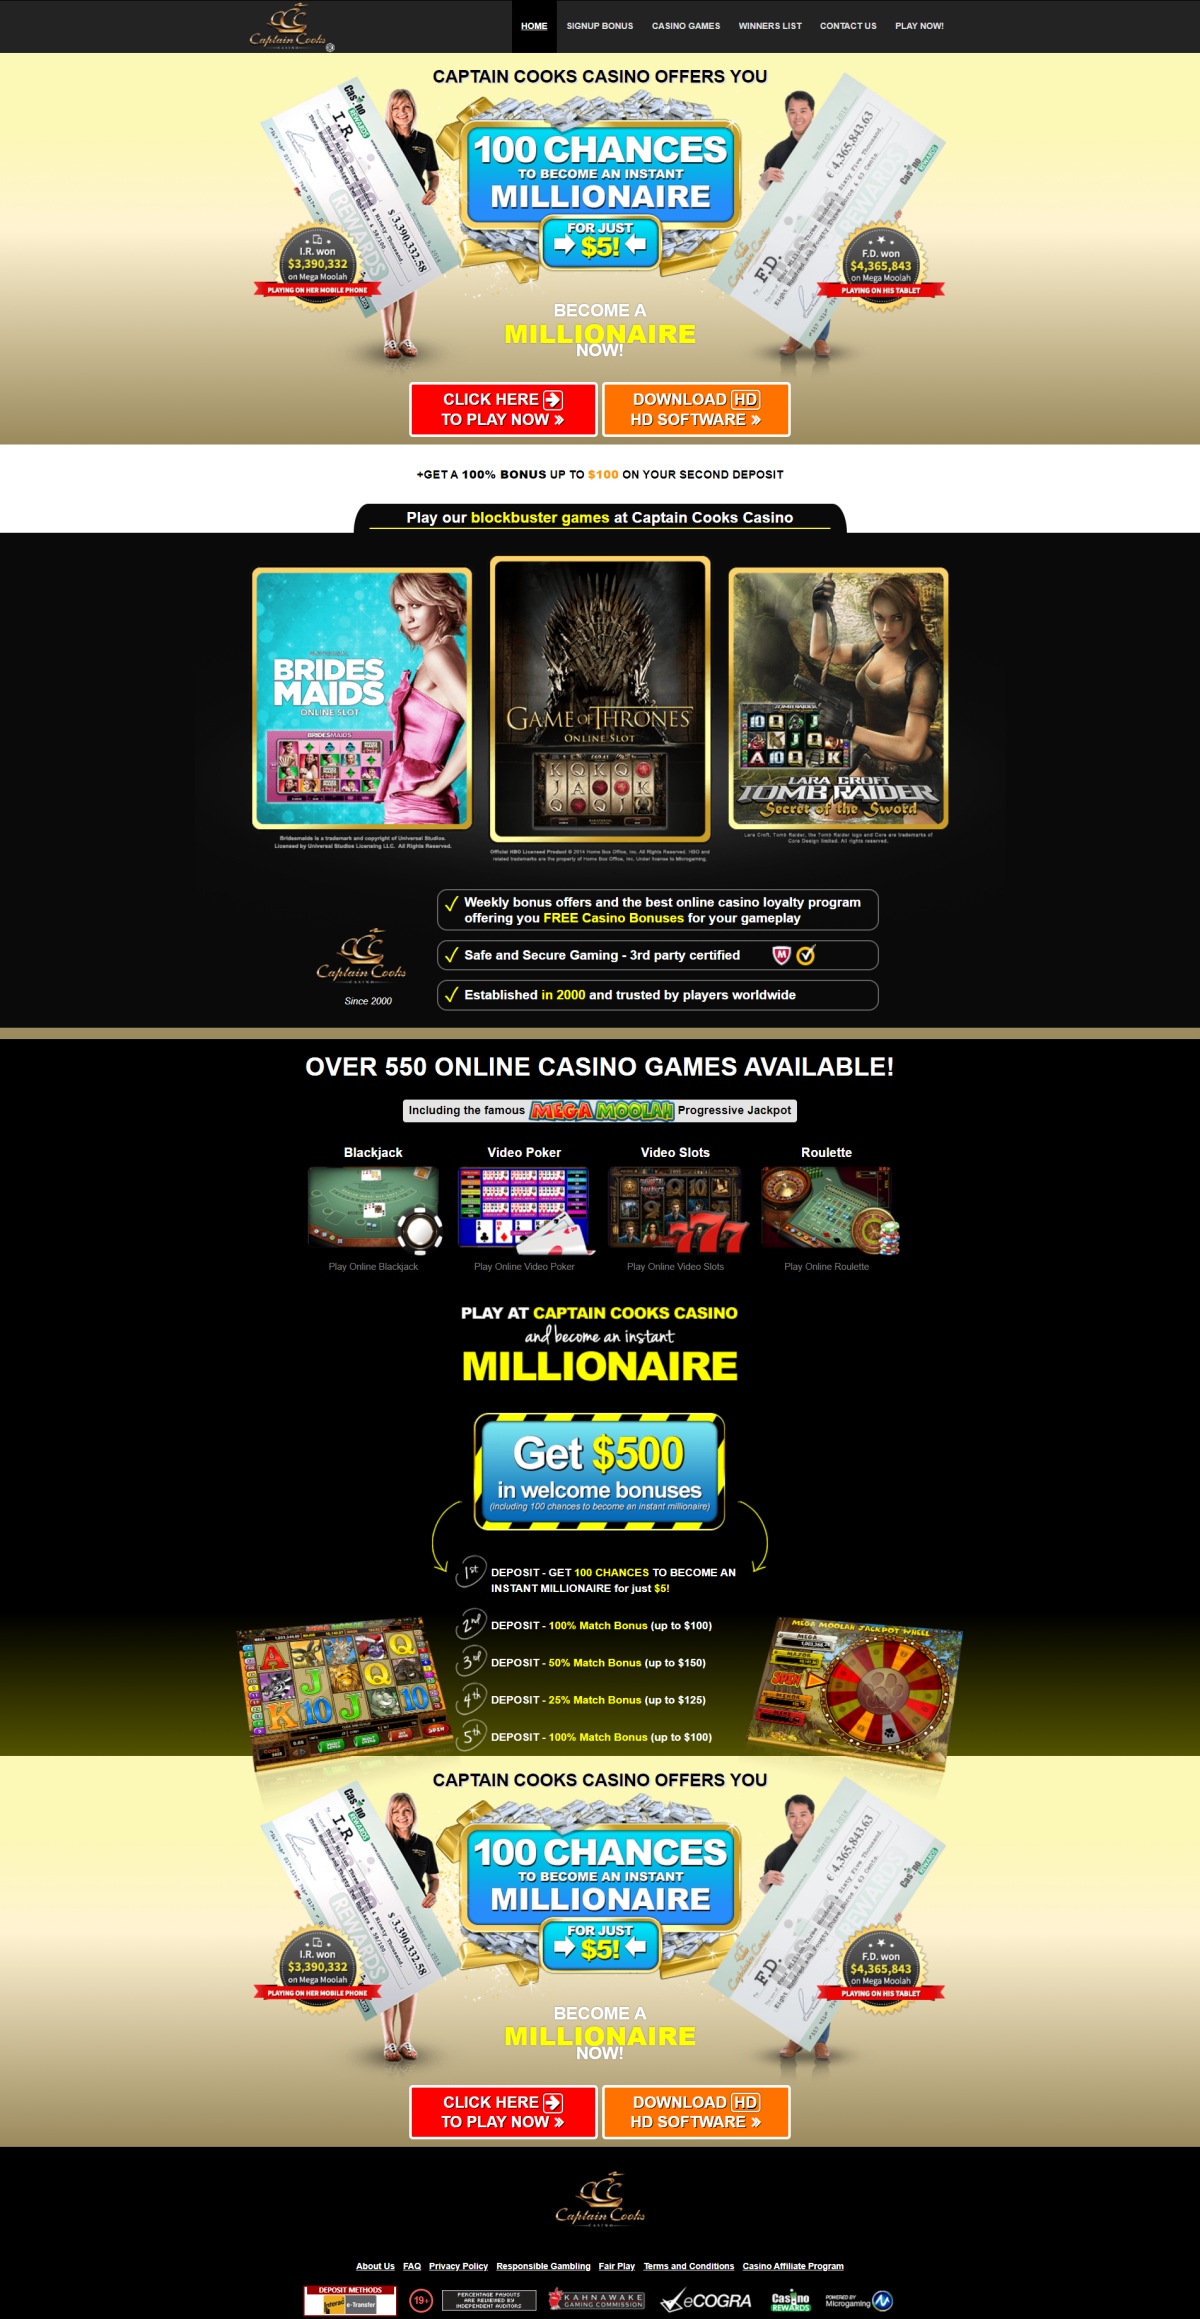 Captain Cooks casino offers you 100chances to become an instant millionaire for just $5! Play their blockbuster games at Captain Cooks Casino. Weekly bonus offers and the best online casino loyalty program offering you FREE Casino Bonuses for your gameplay. Safe and Secure Gaming - 3rd party certified Established in 2000 and trusted by players worldwide. Over 550 online casino games available! Including the famous MEGA MOOLAH Progressive Jackpot !